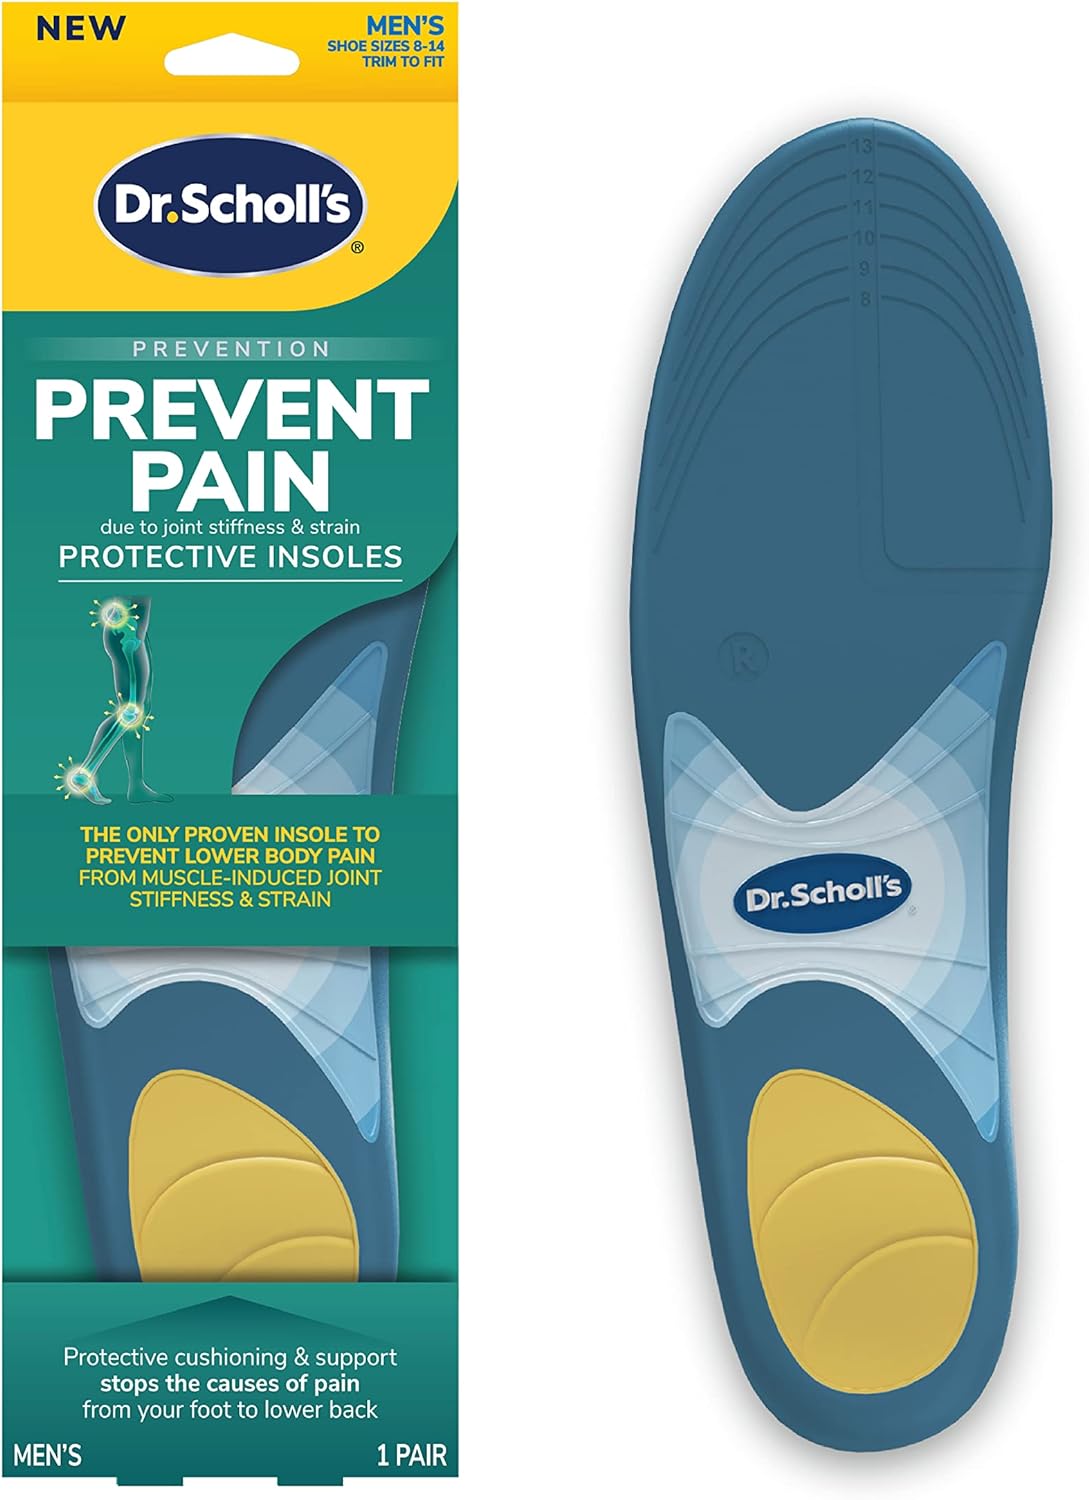 Dr. Scholls Prevent Pain Protective Insoles, Protect Against Foot, Knee, Lower Back Pain, Promote Foot Health  Wellness, Trim to Fit Insert, Men Shoe Size 8-14, 1 Pair